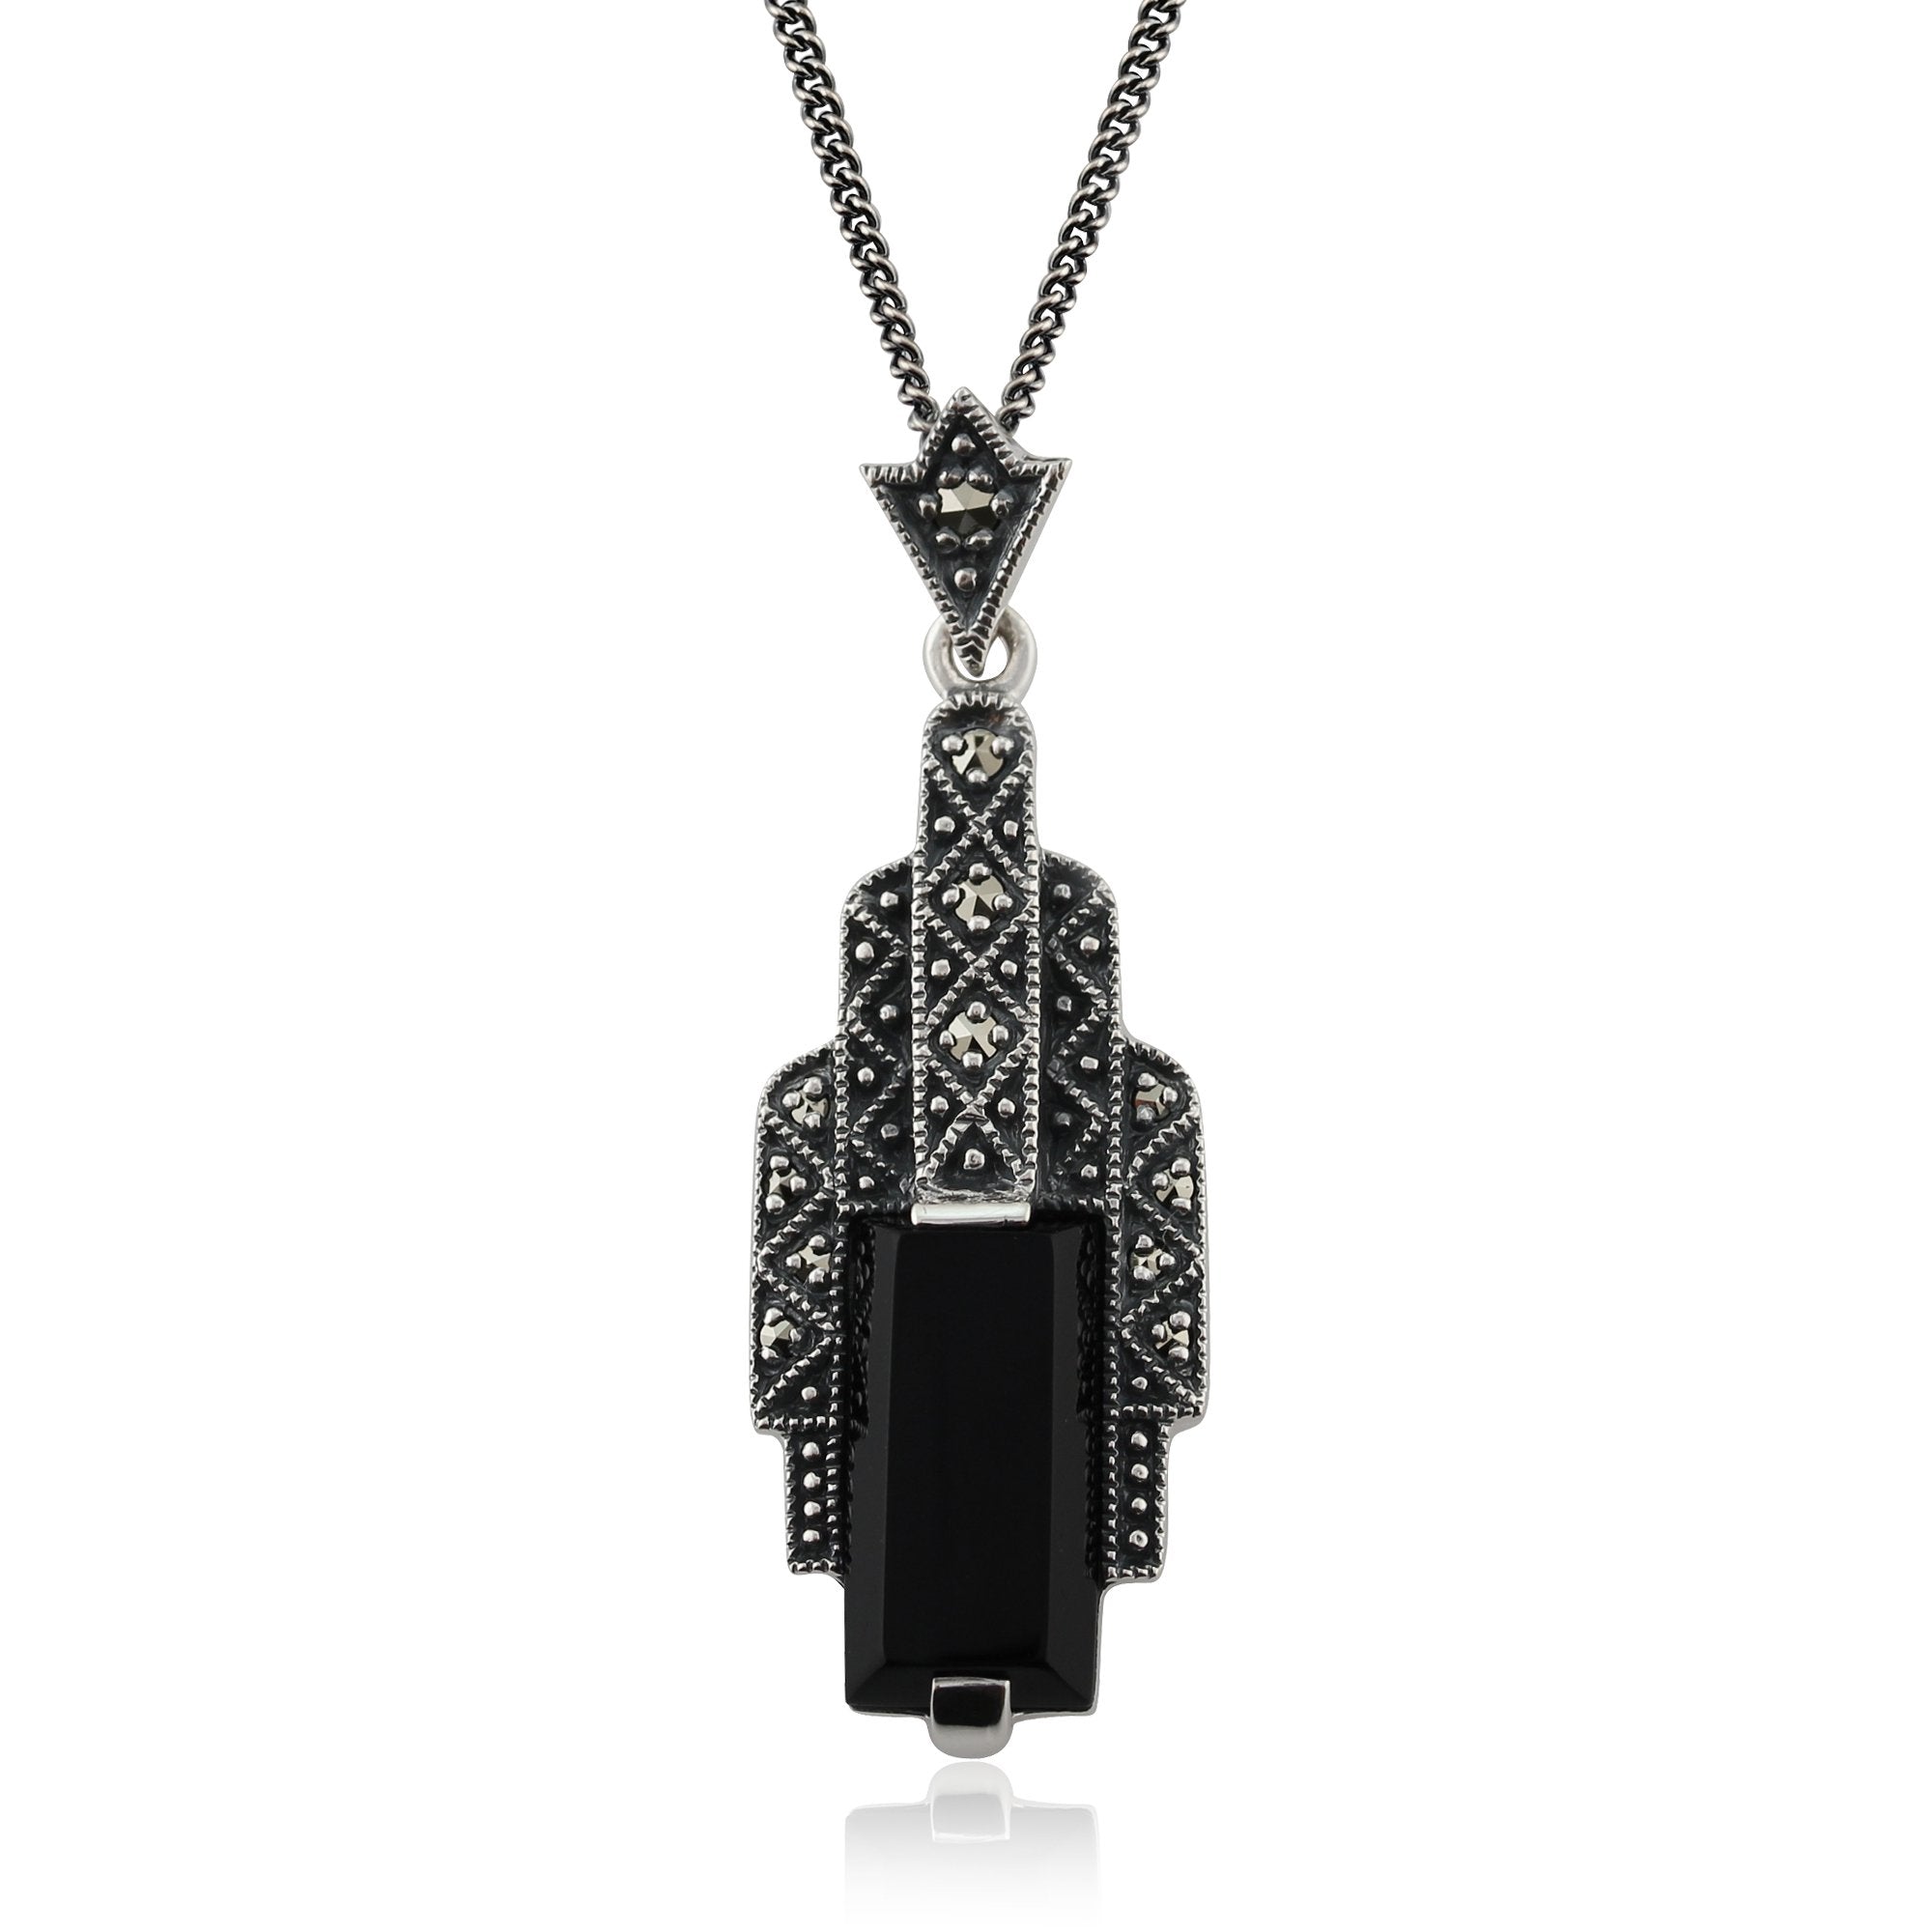 Art Deco Style Rectangle Black Onyx Cabochon & Marcasite Necklace In Sterling Silver